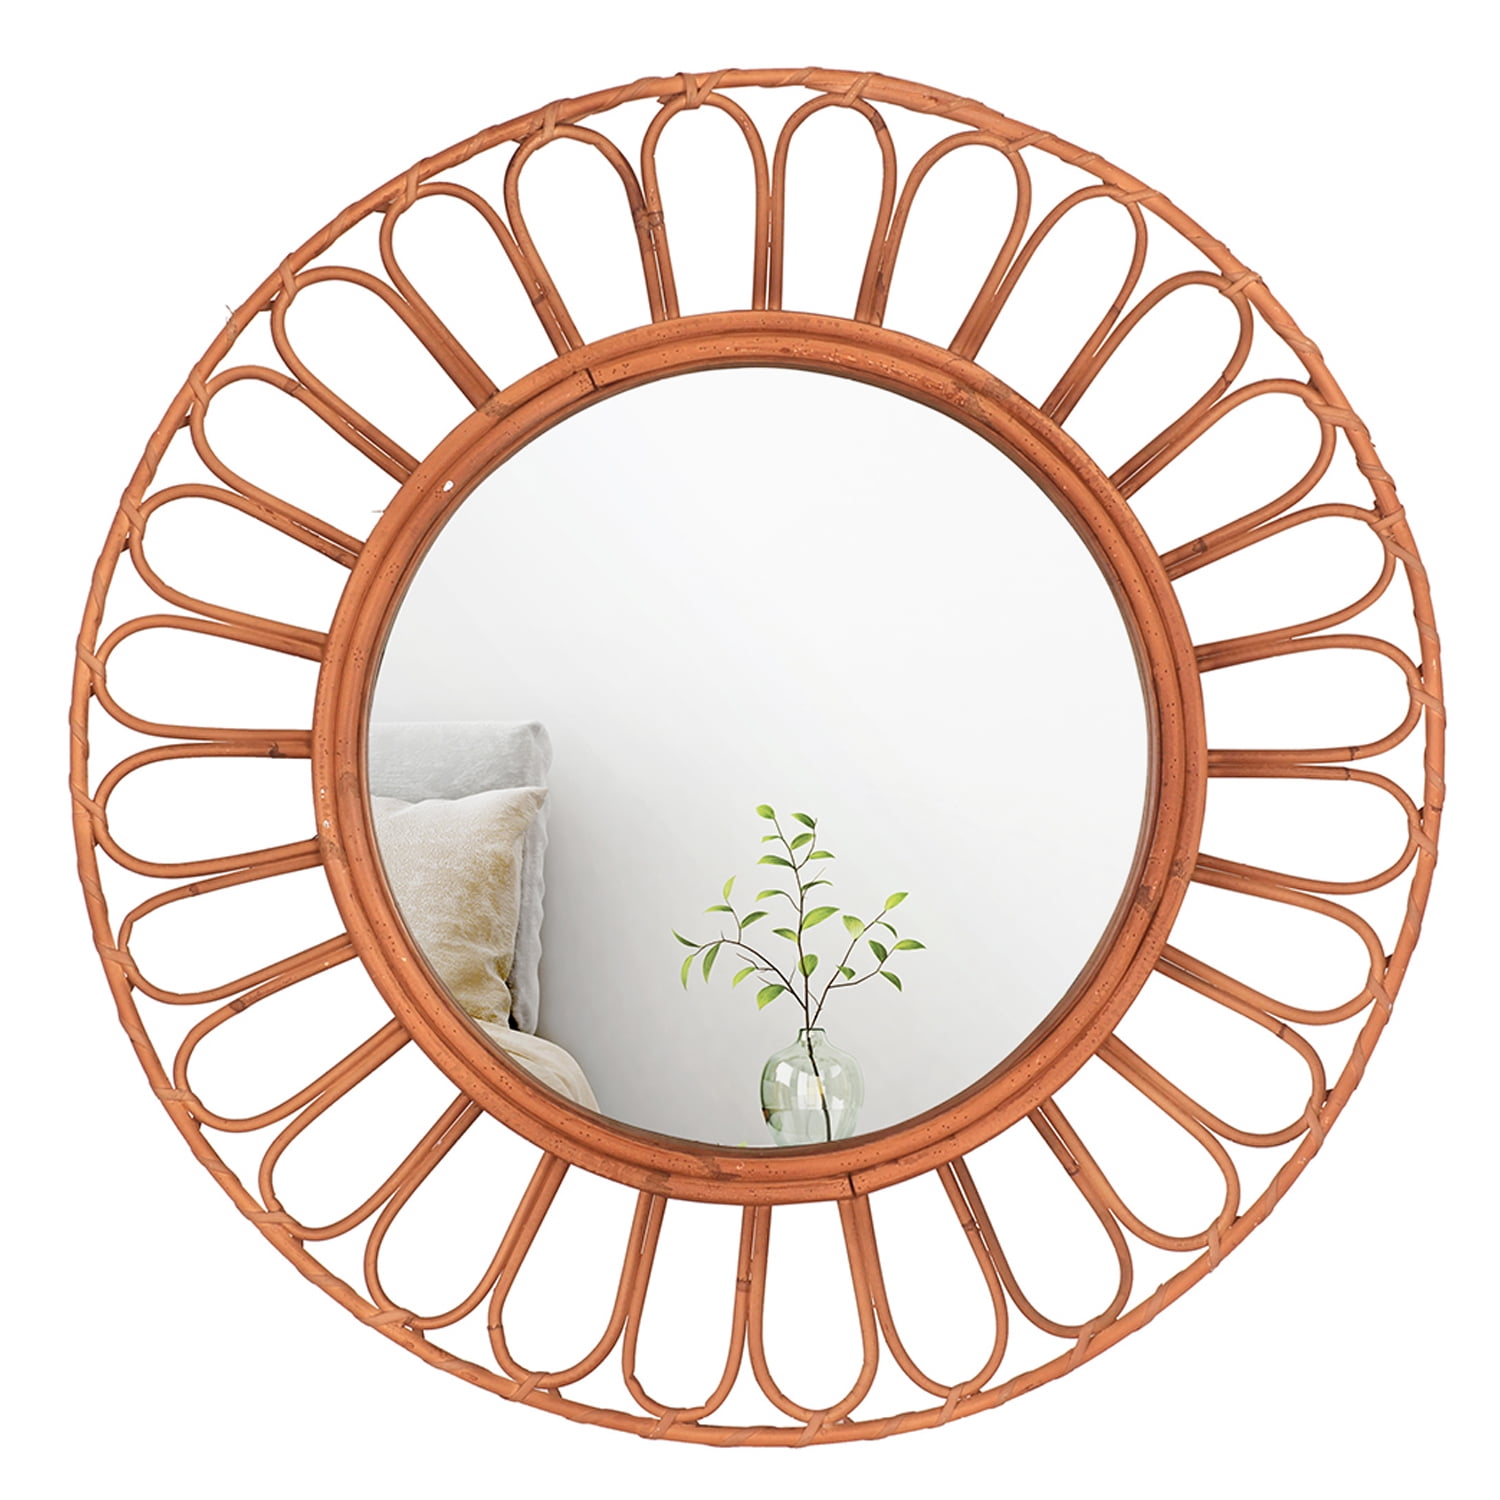 Buy Vintage Wood Oval Mirrors, Antique Oval Decorative Bathroom Mirrors for  sale in the UK, US, Canada,Australia, Italy – Antique Vintage Hub. – Vedhex  Private Limited